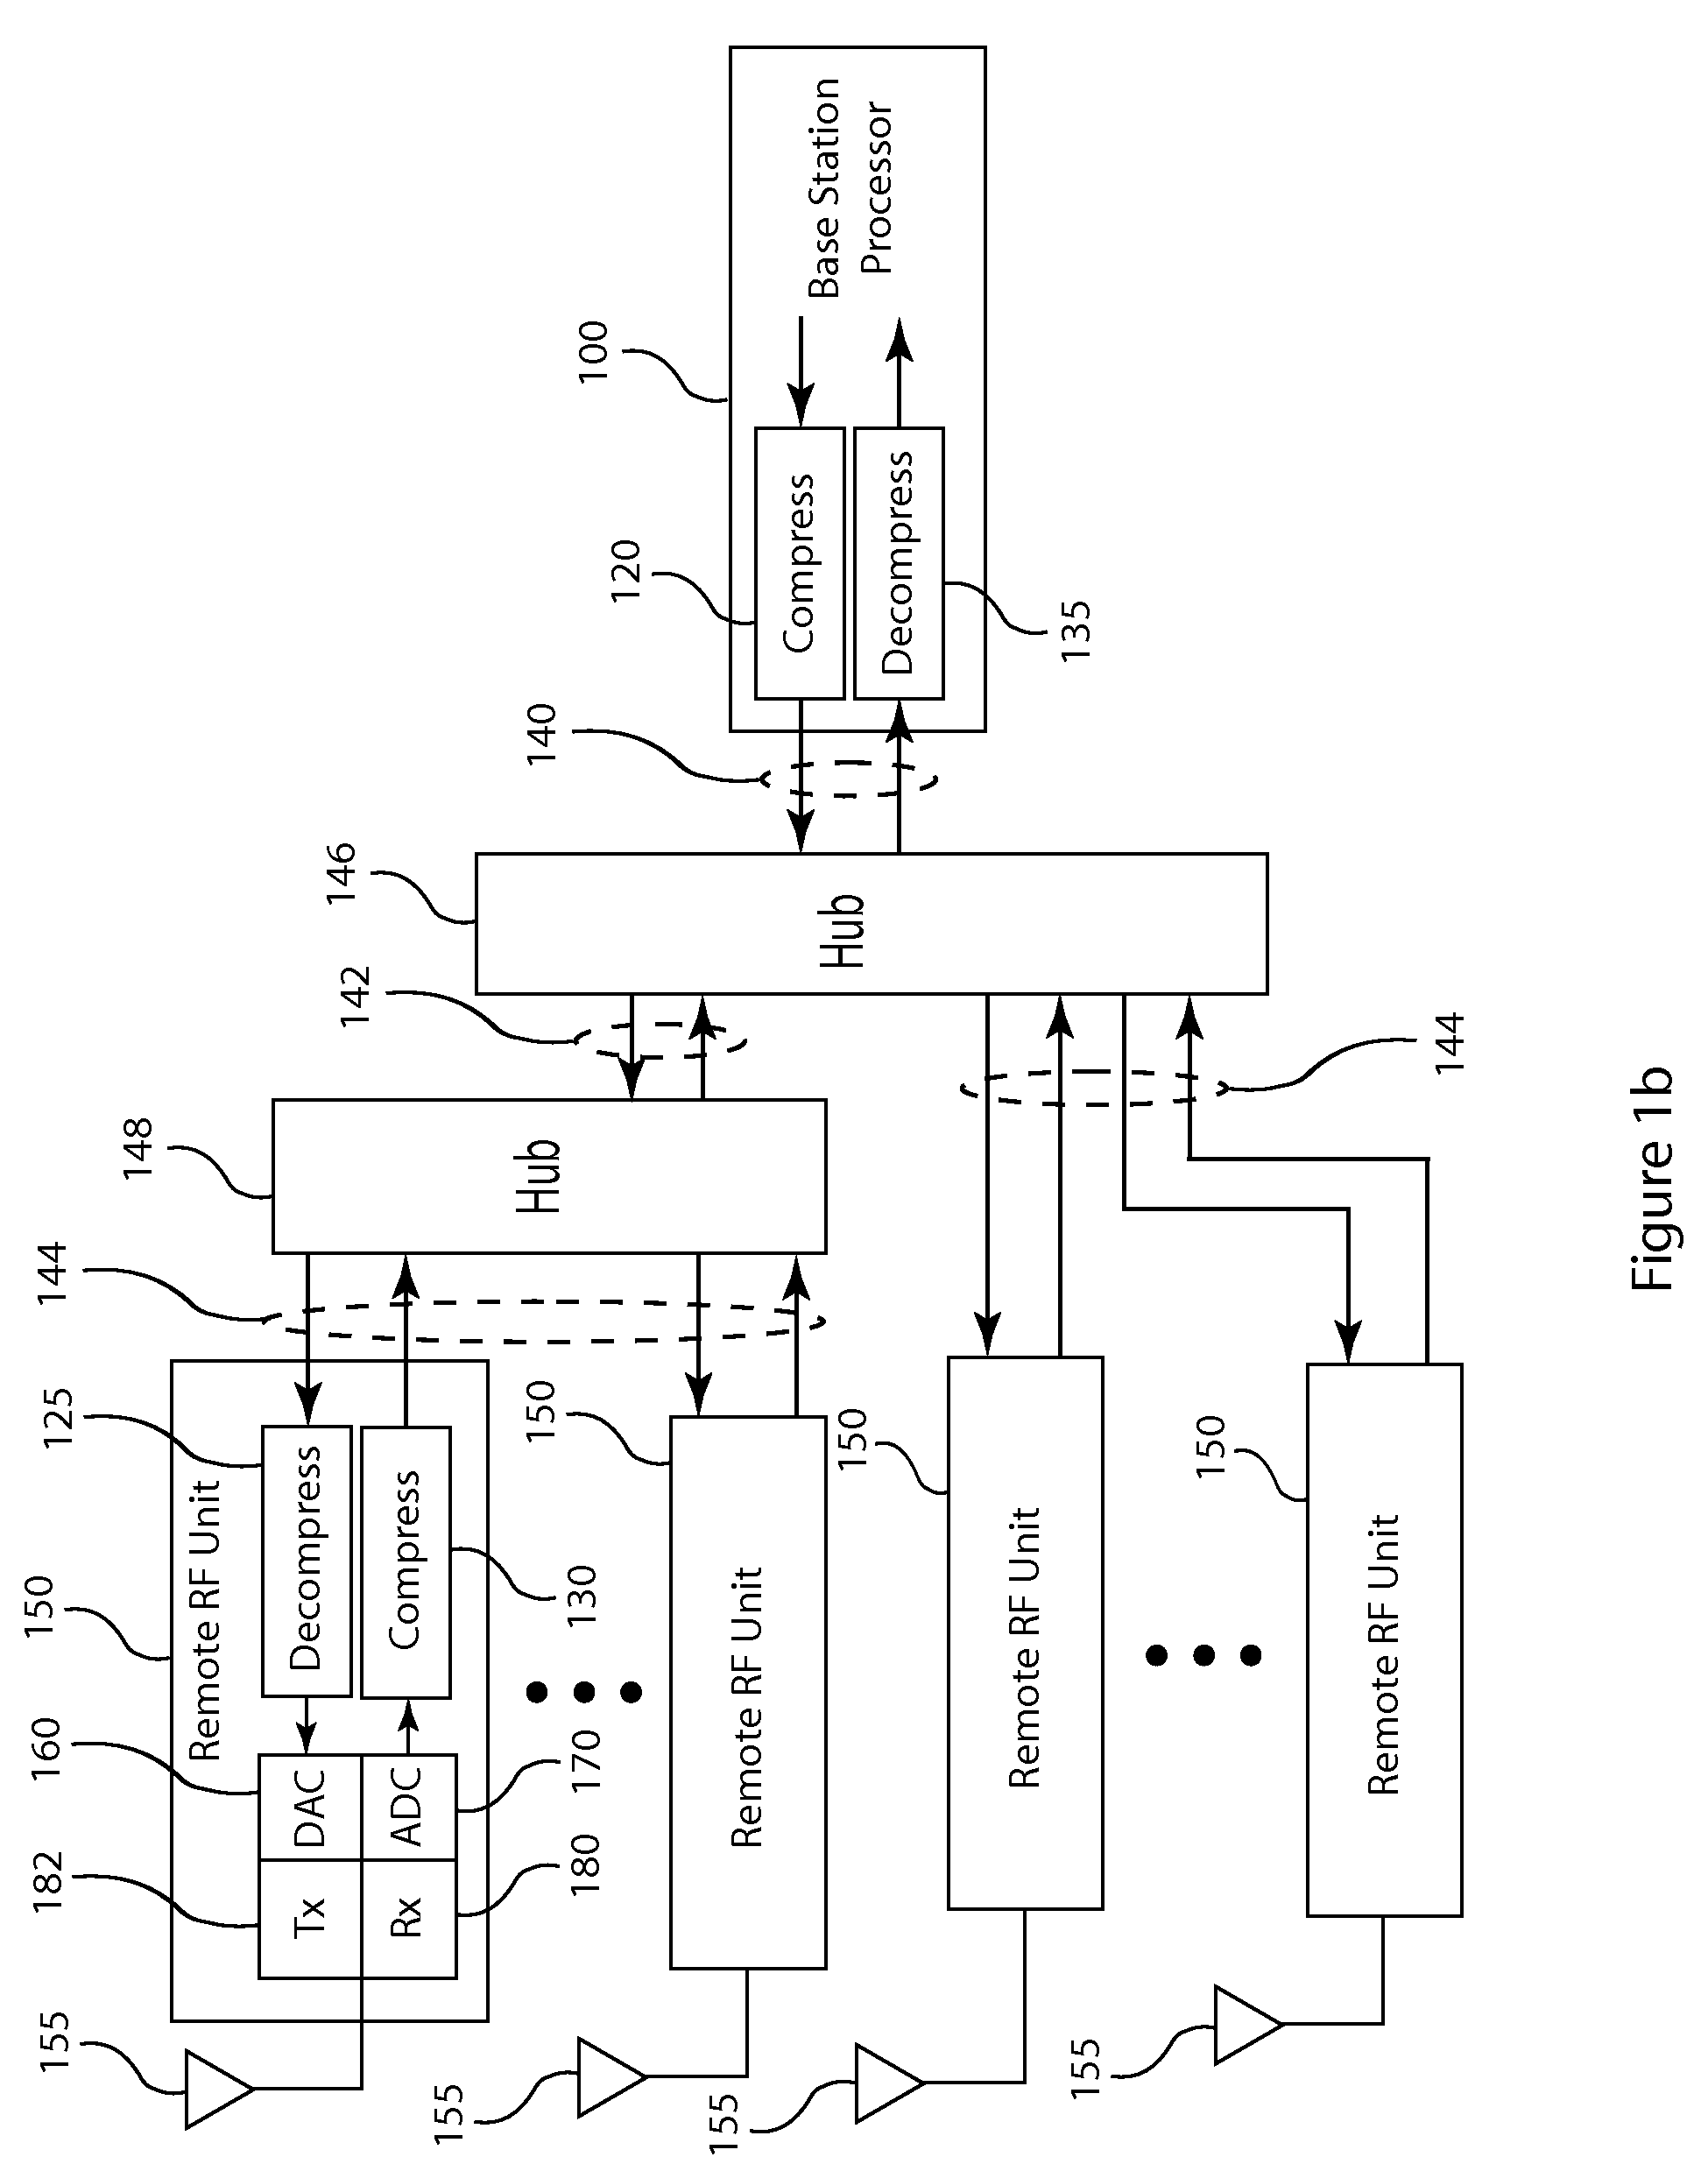 Frequency domain compression in a base transceiver system